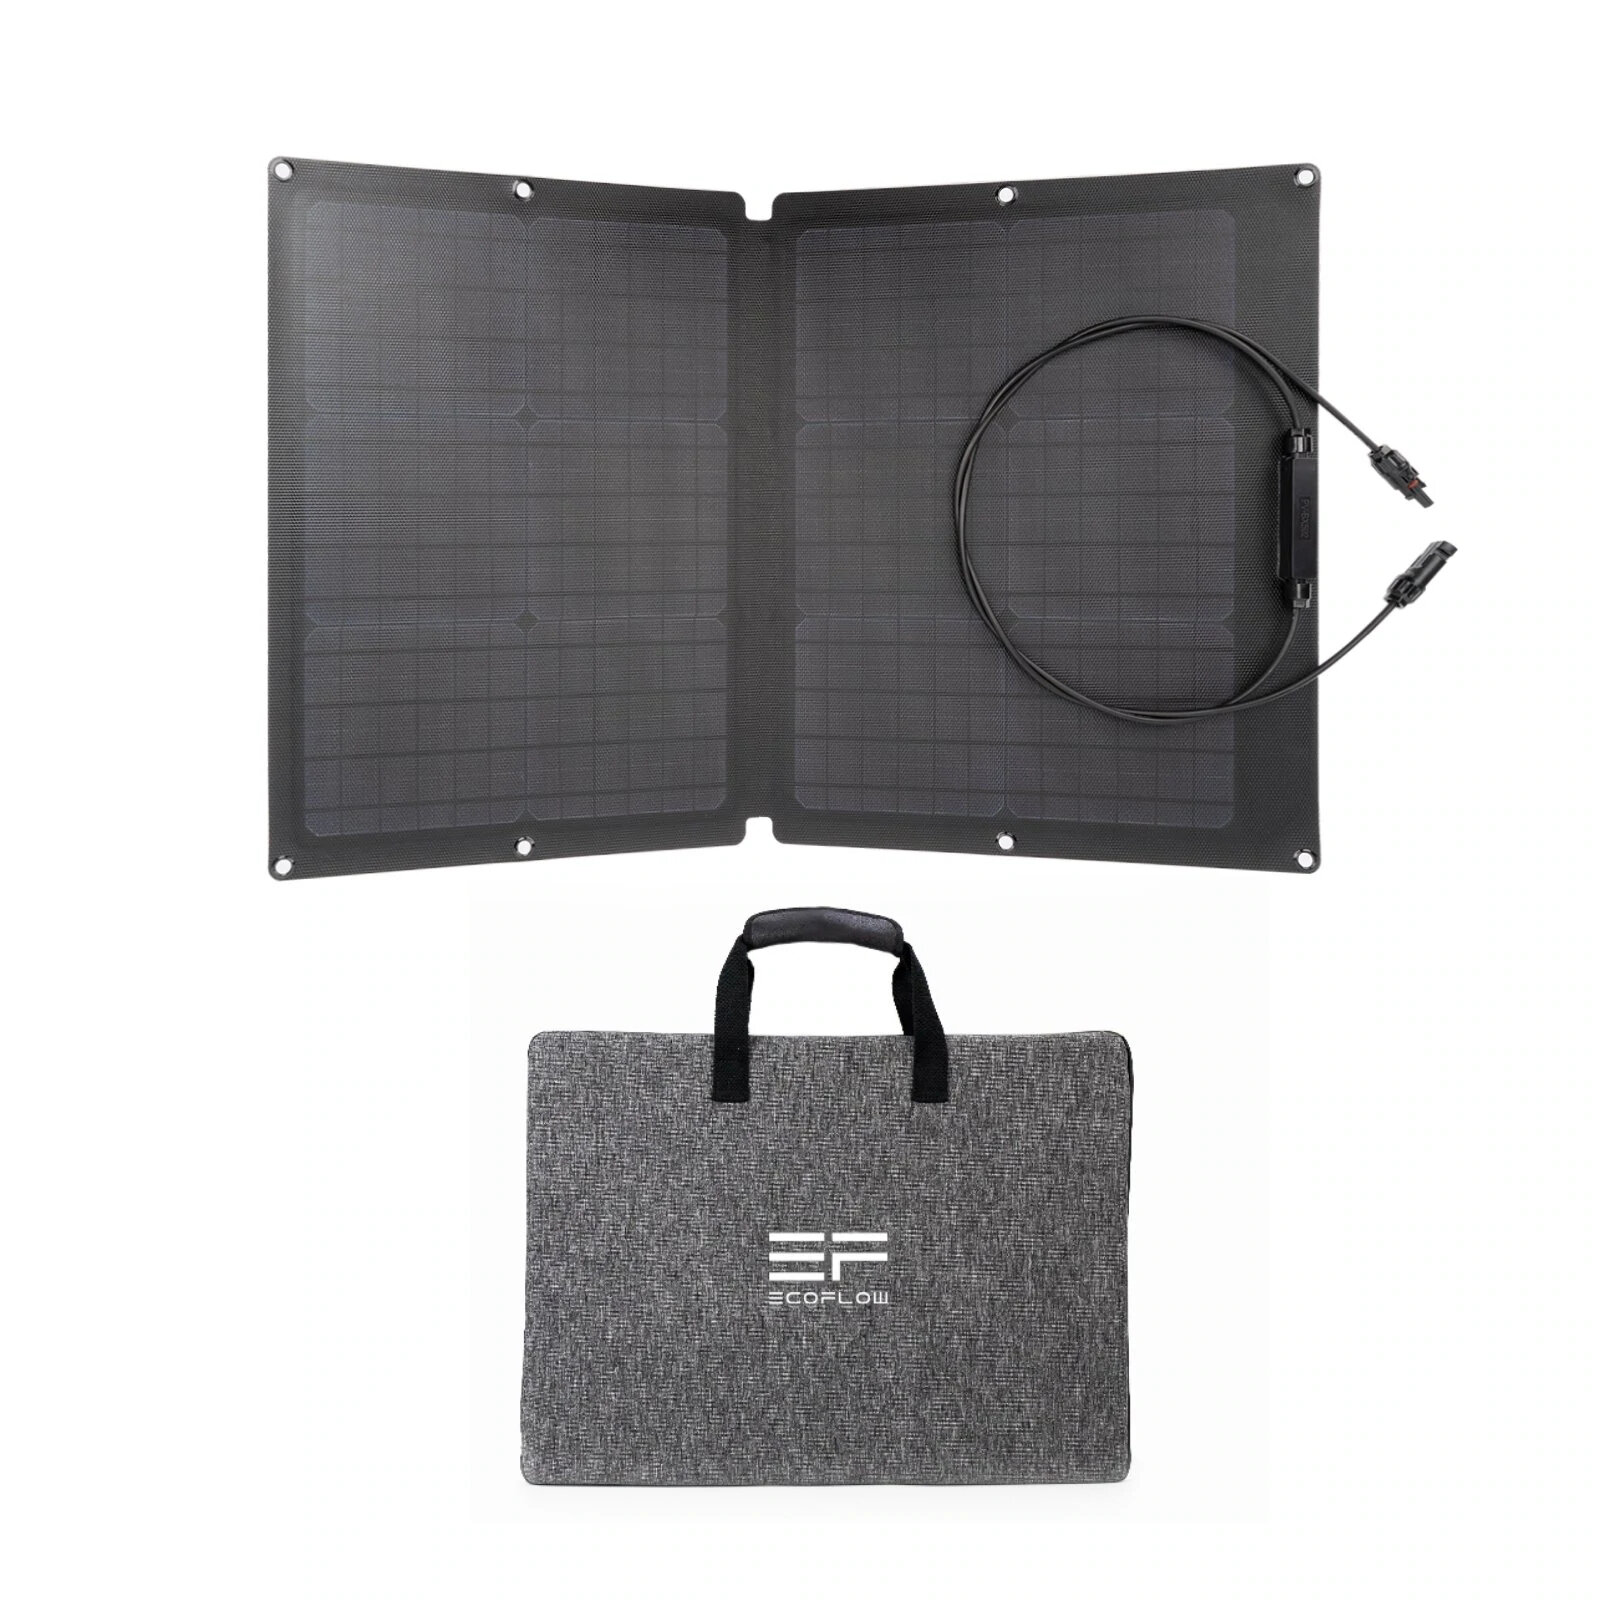 [US Direct ] EcoFlow 60W Solar Panel 21,6V 3,5A Portable Foldable IP67 Waterproof Solar Panel 21*32,1*1,0 in (53,7*81,5*2,4 cm)